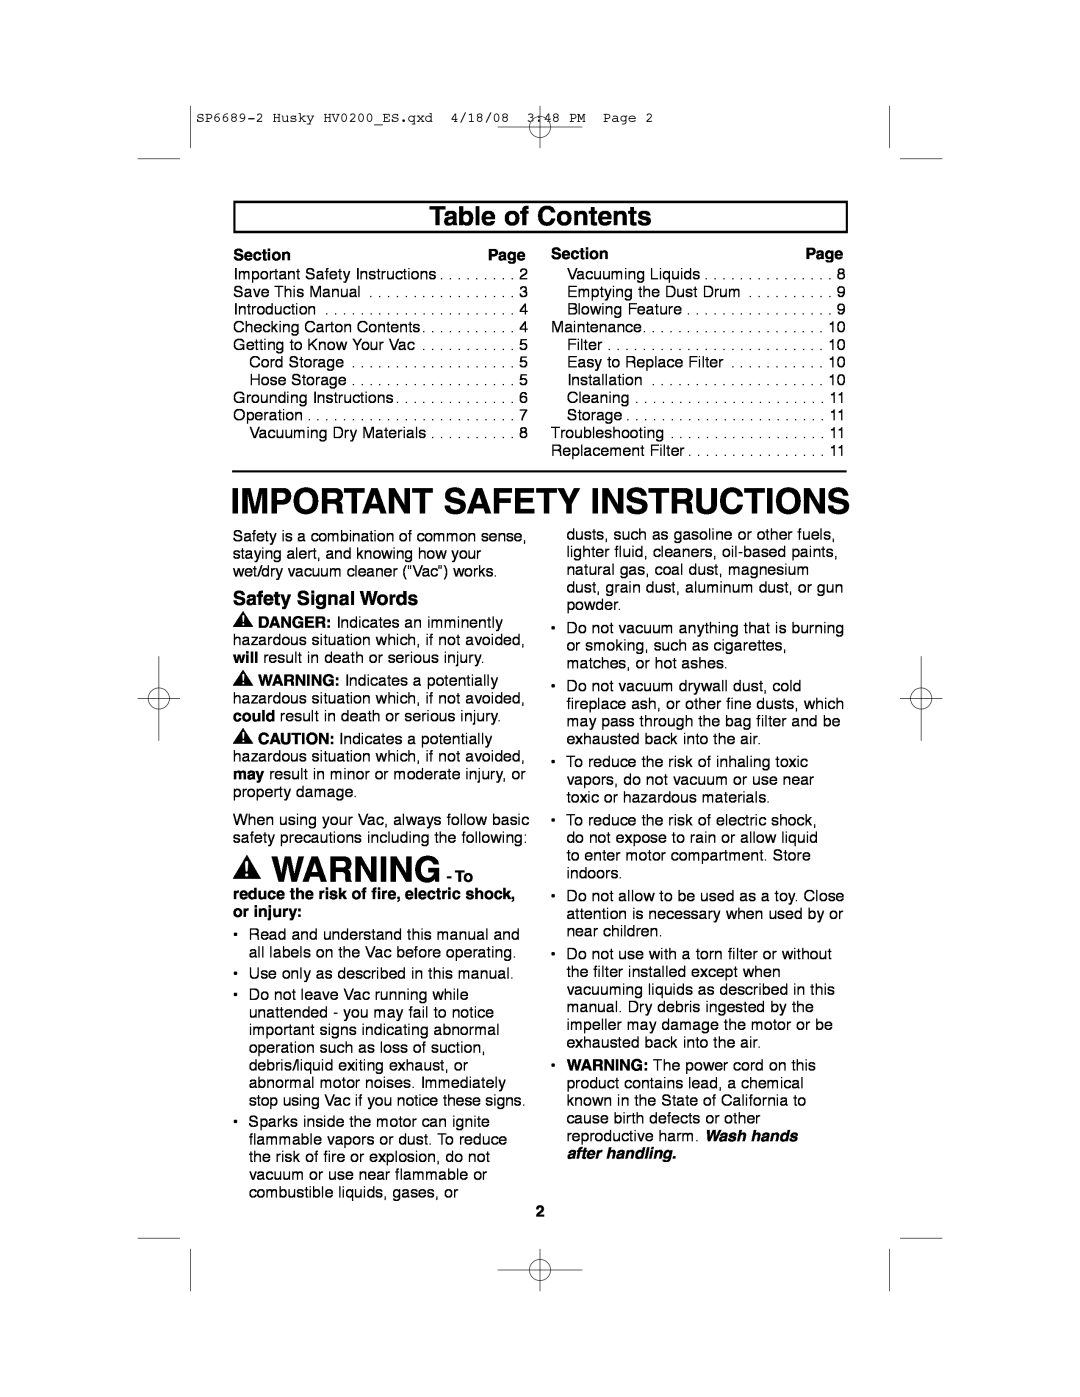 Husky HV02000 manual Important Safety Instructions, WARNING - To, Table of Contents, Safety Signal Words 